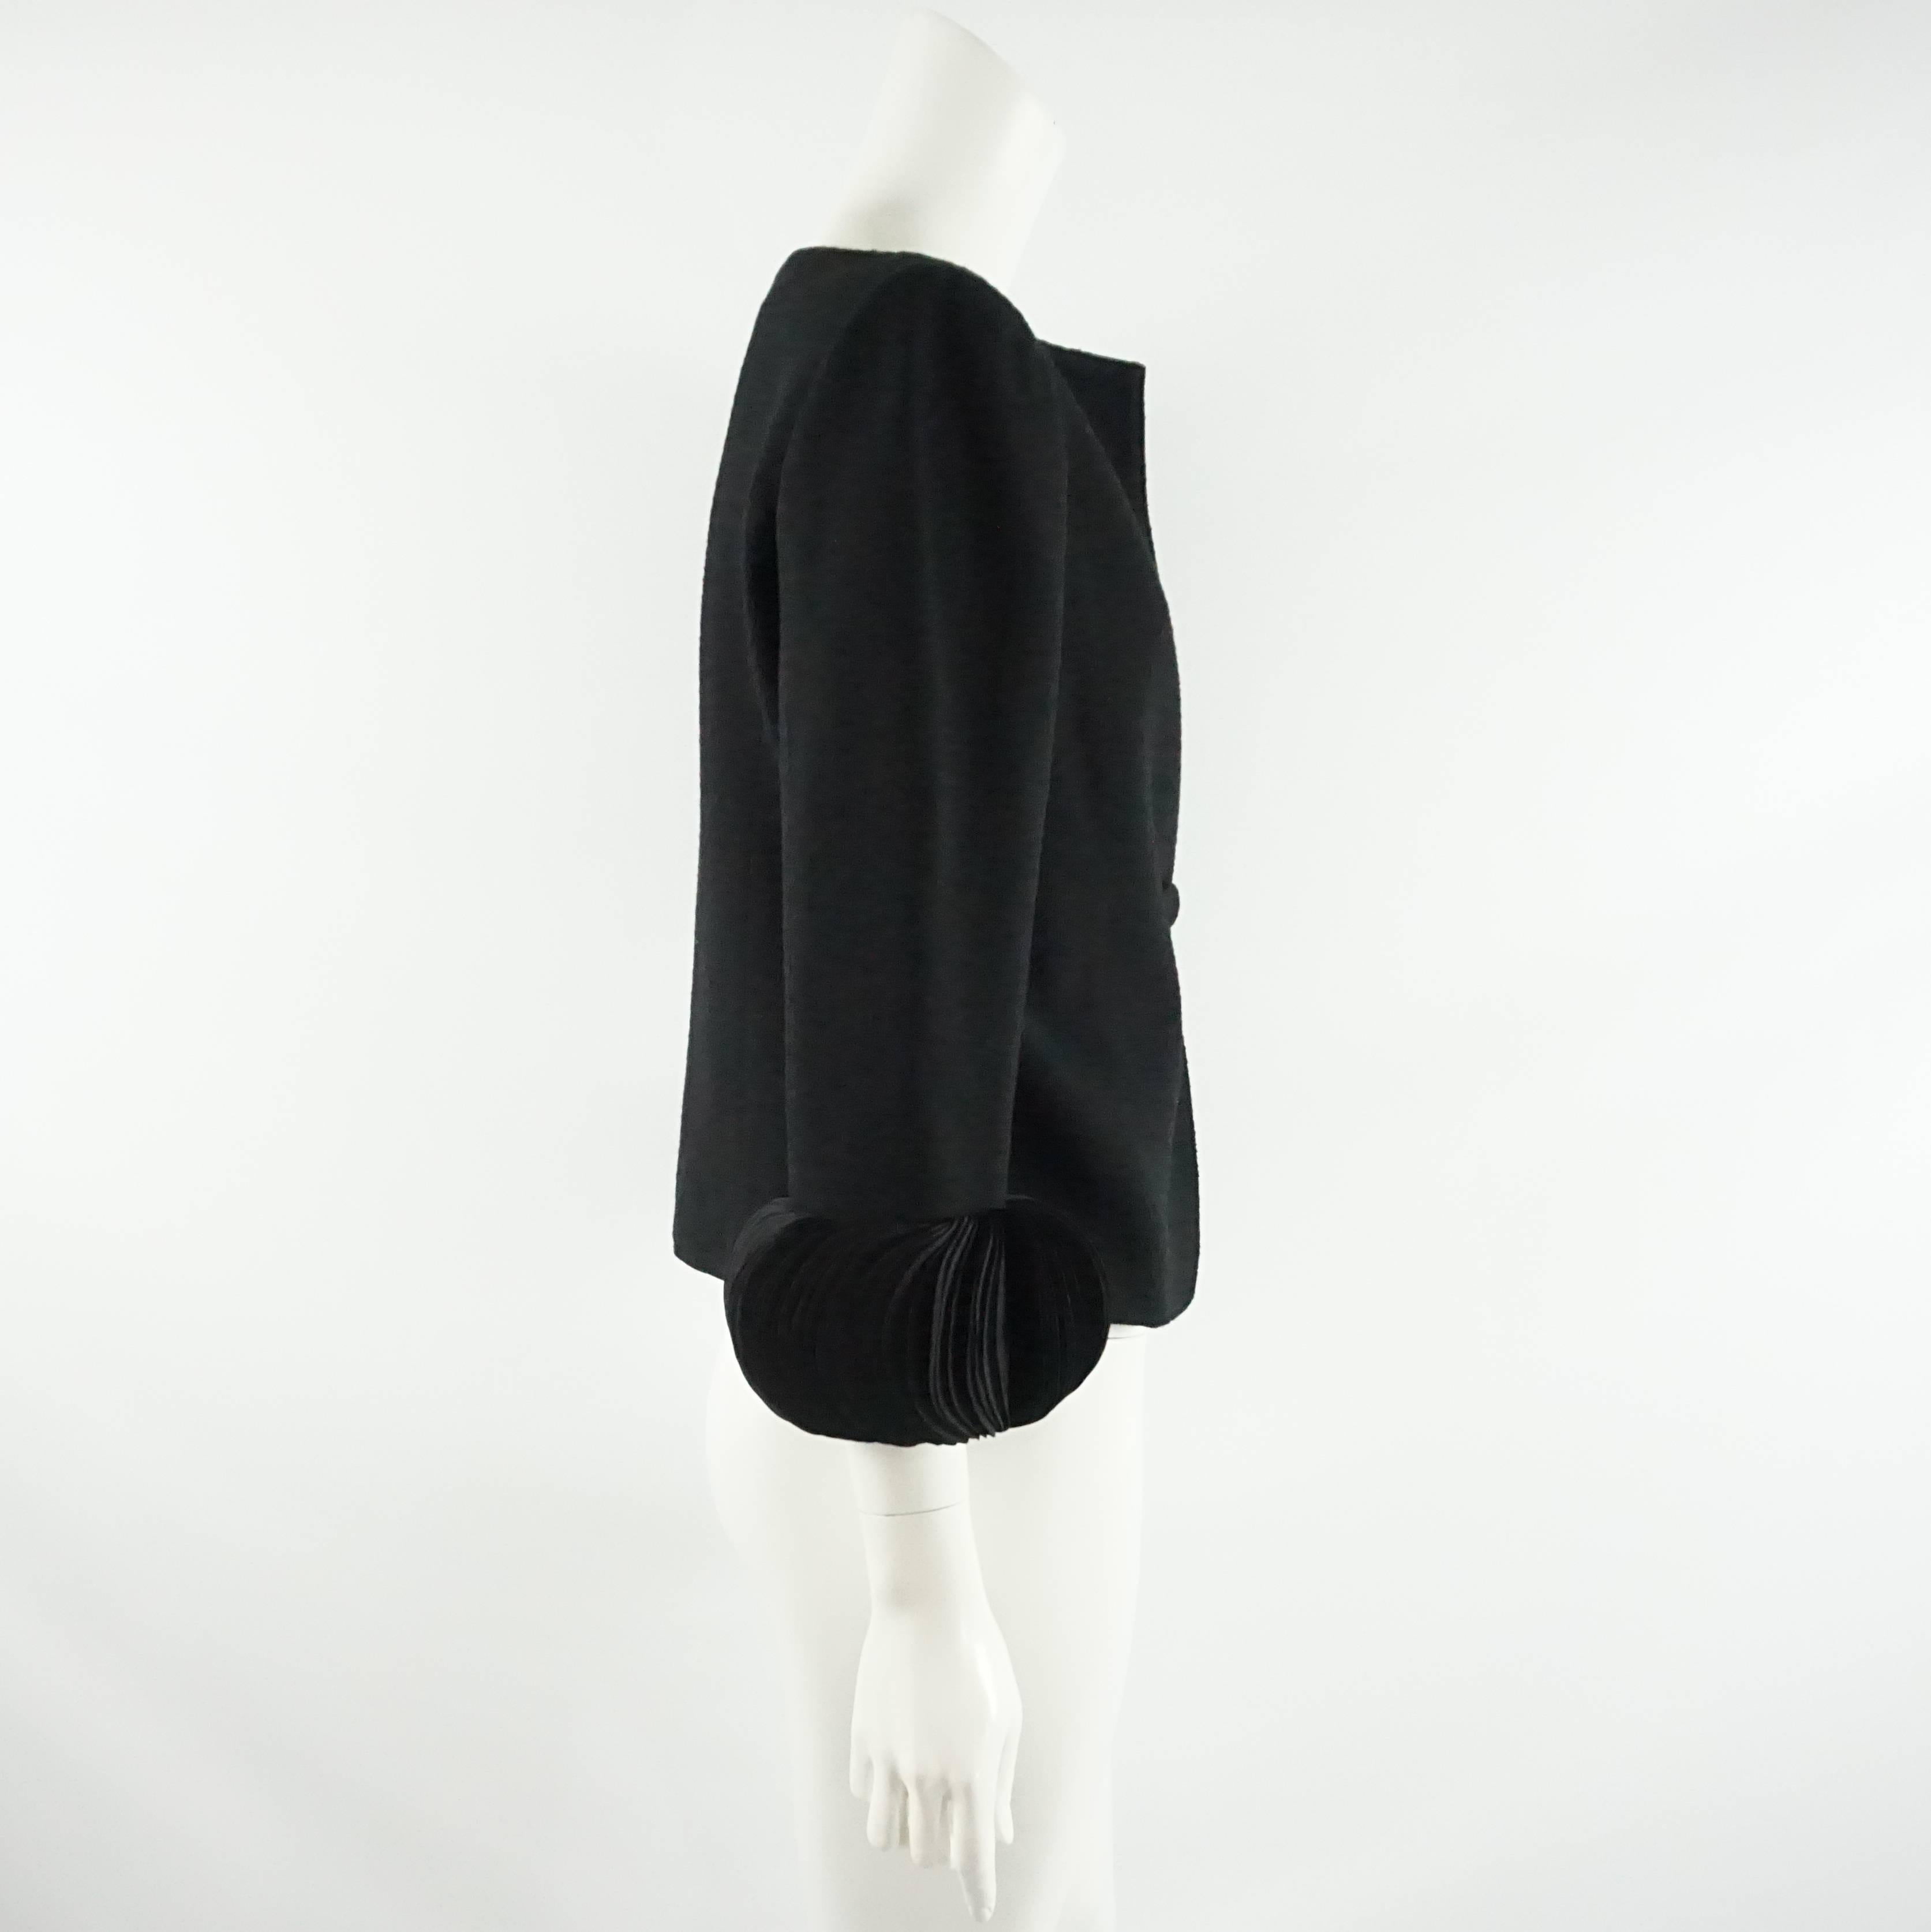 This Valentino wool jacket is black with thick petal sleeves. It has a single button closure and light shoulder apds. This jacket is in excellent condition.

Measurements
Shoulder to Shoulder: 15.75